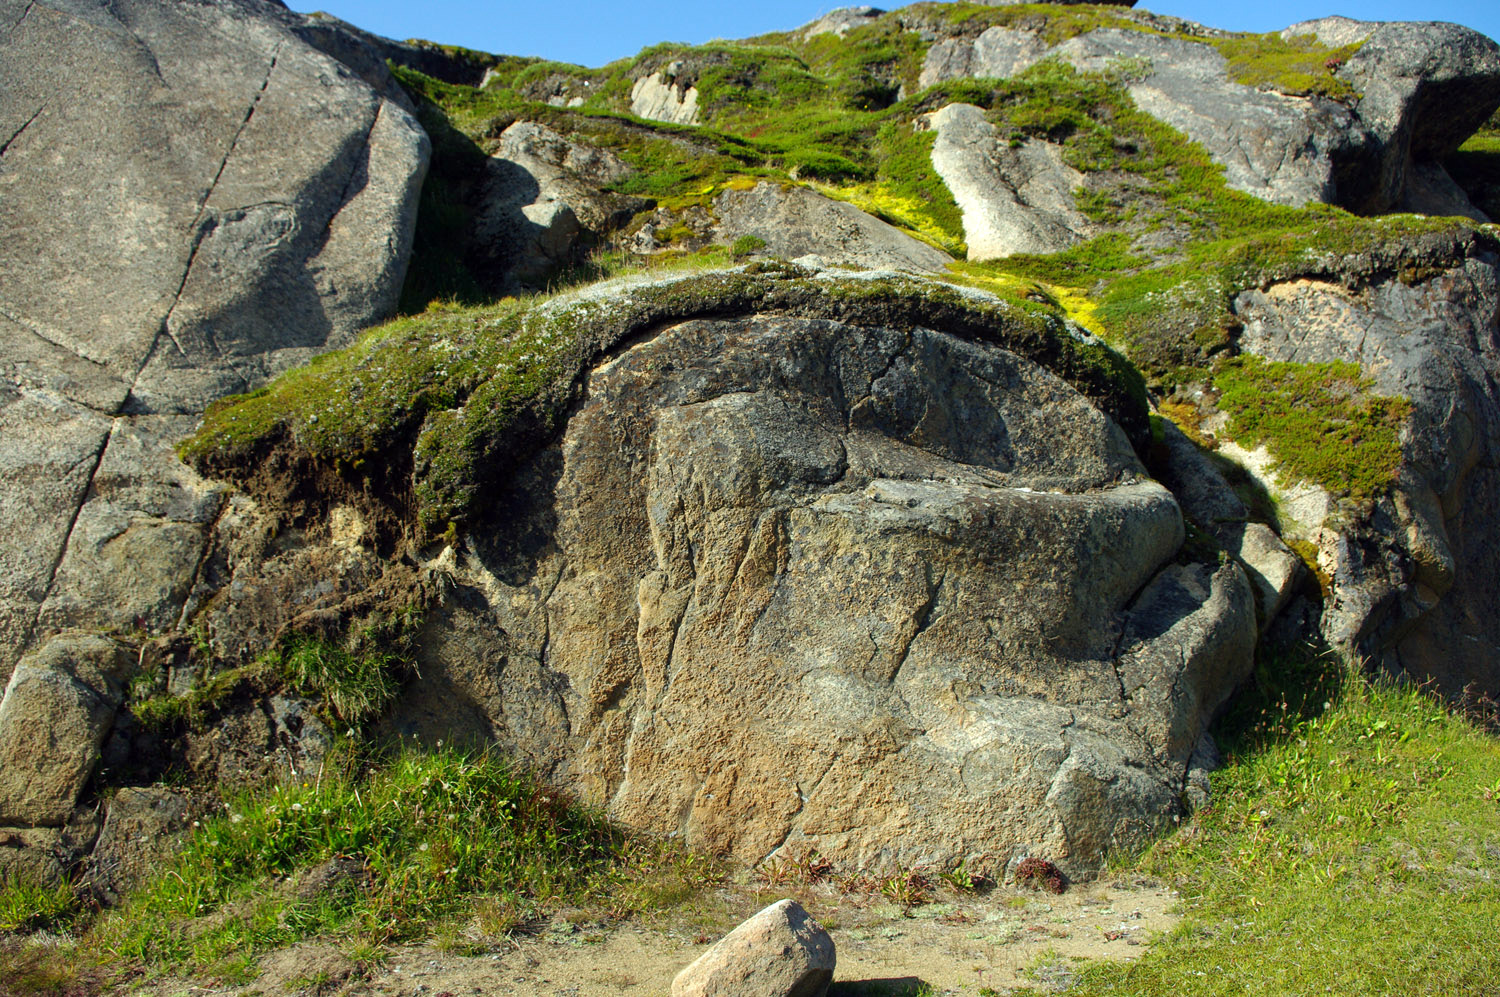 Moss and soil build-up on rock - Greenland, greenland, travel